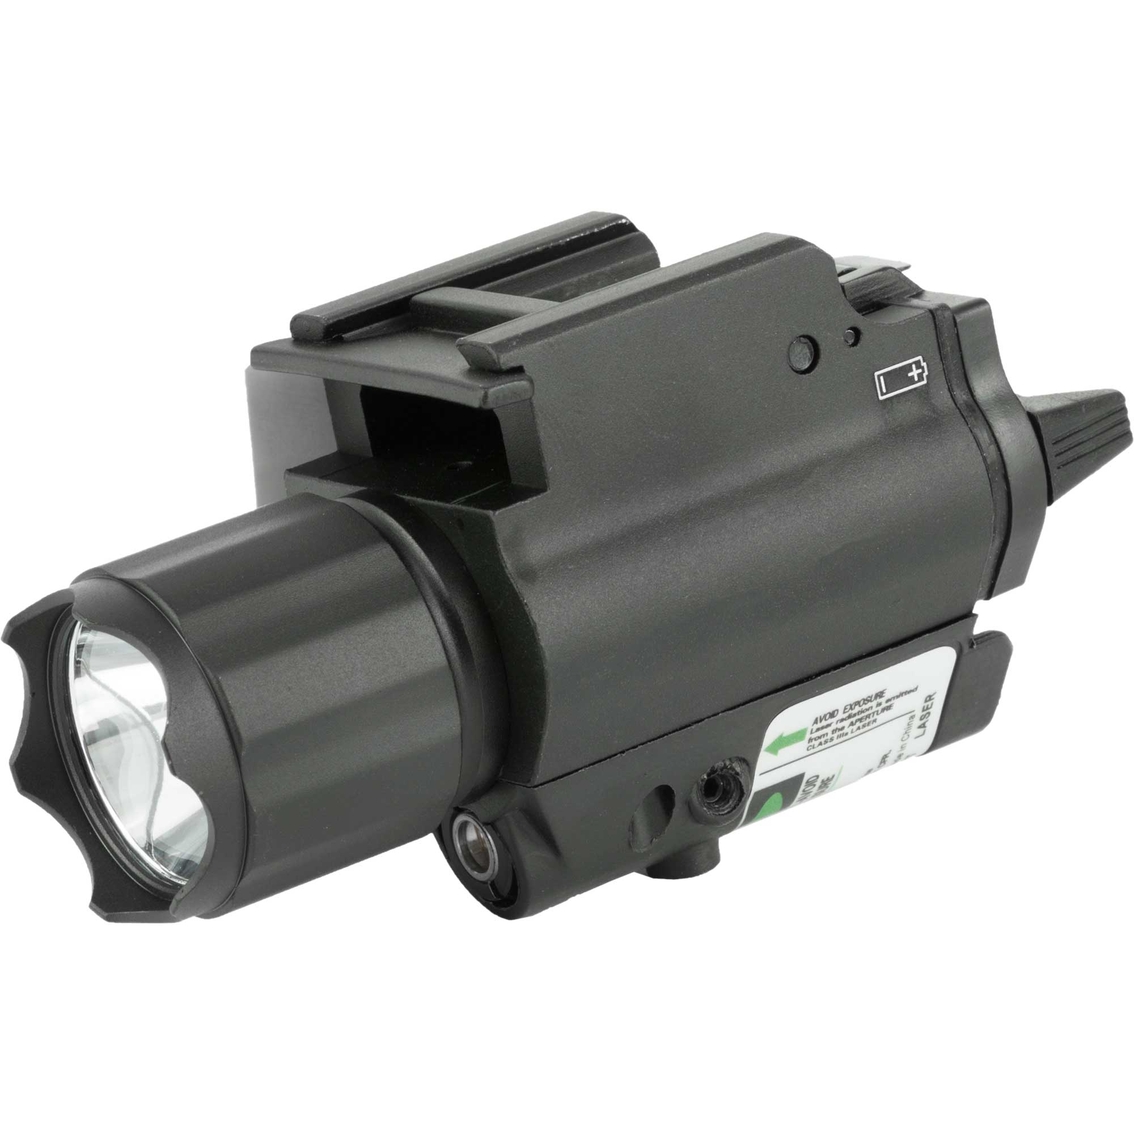 NcStar Quick Release LED Flashlight with Green Laser Fits Picatinny or Weaver Rail - Image 2 of 3